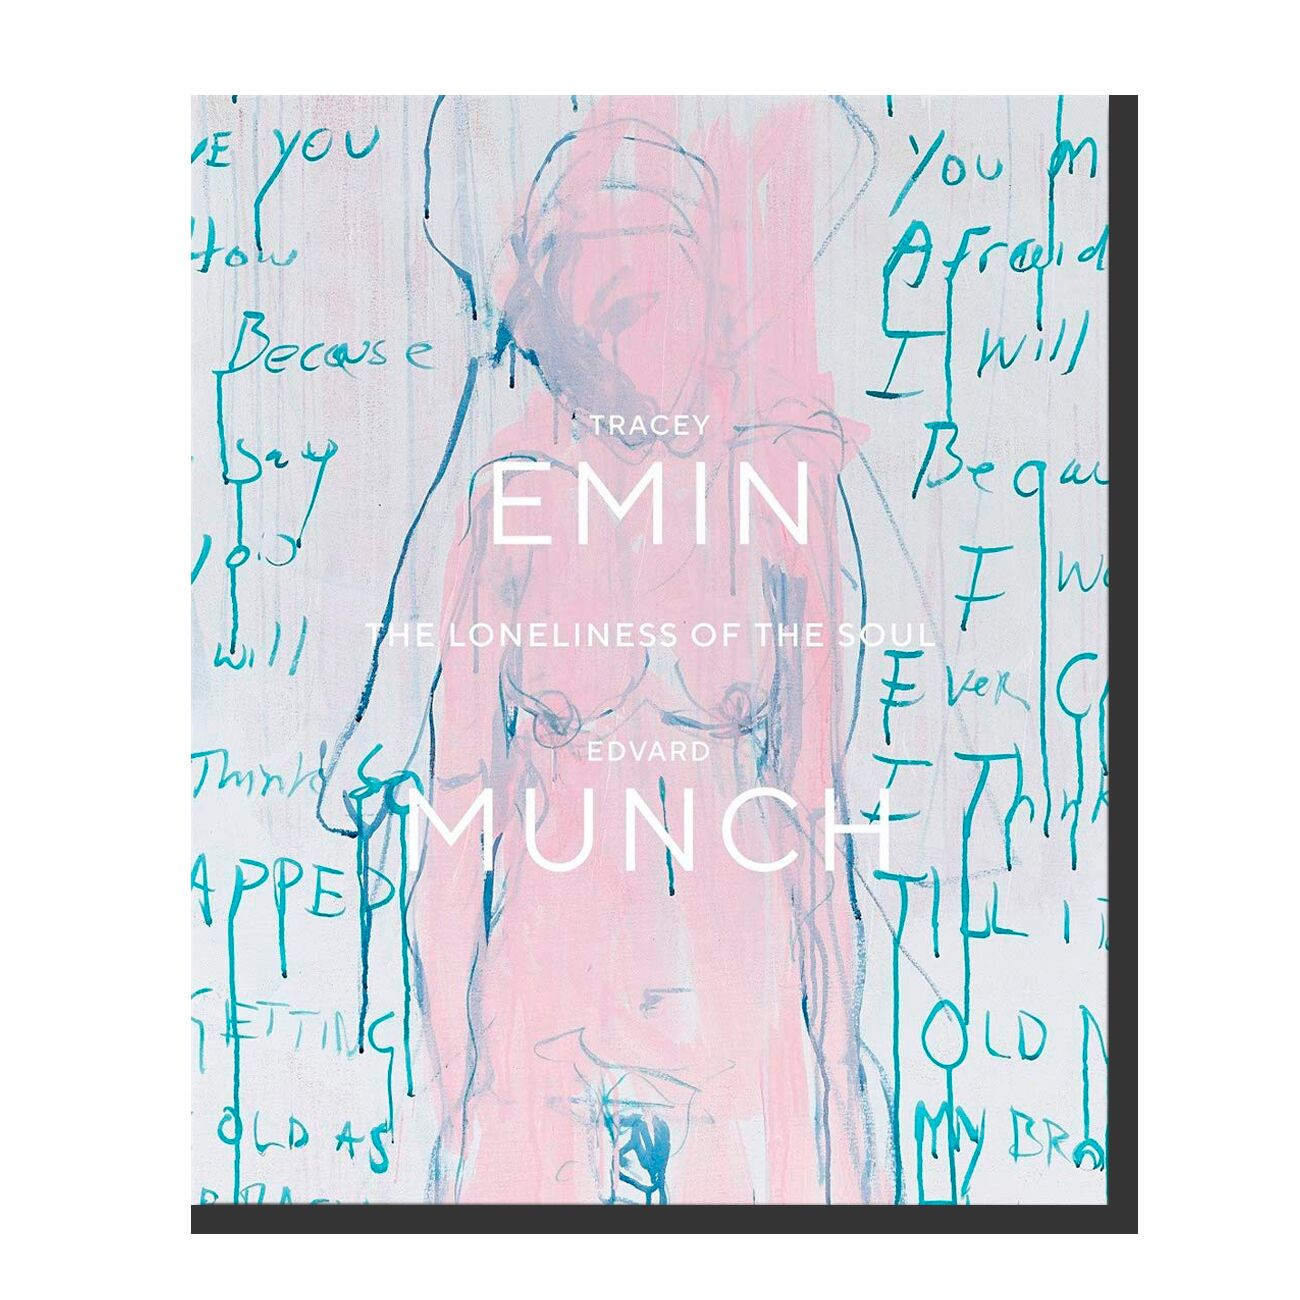 Tracey Emin / Edvard Munch: The Loneliness of the Soul